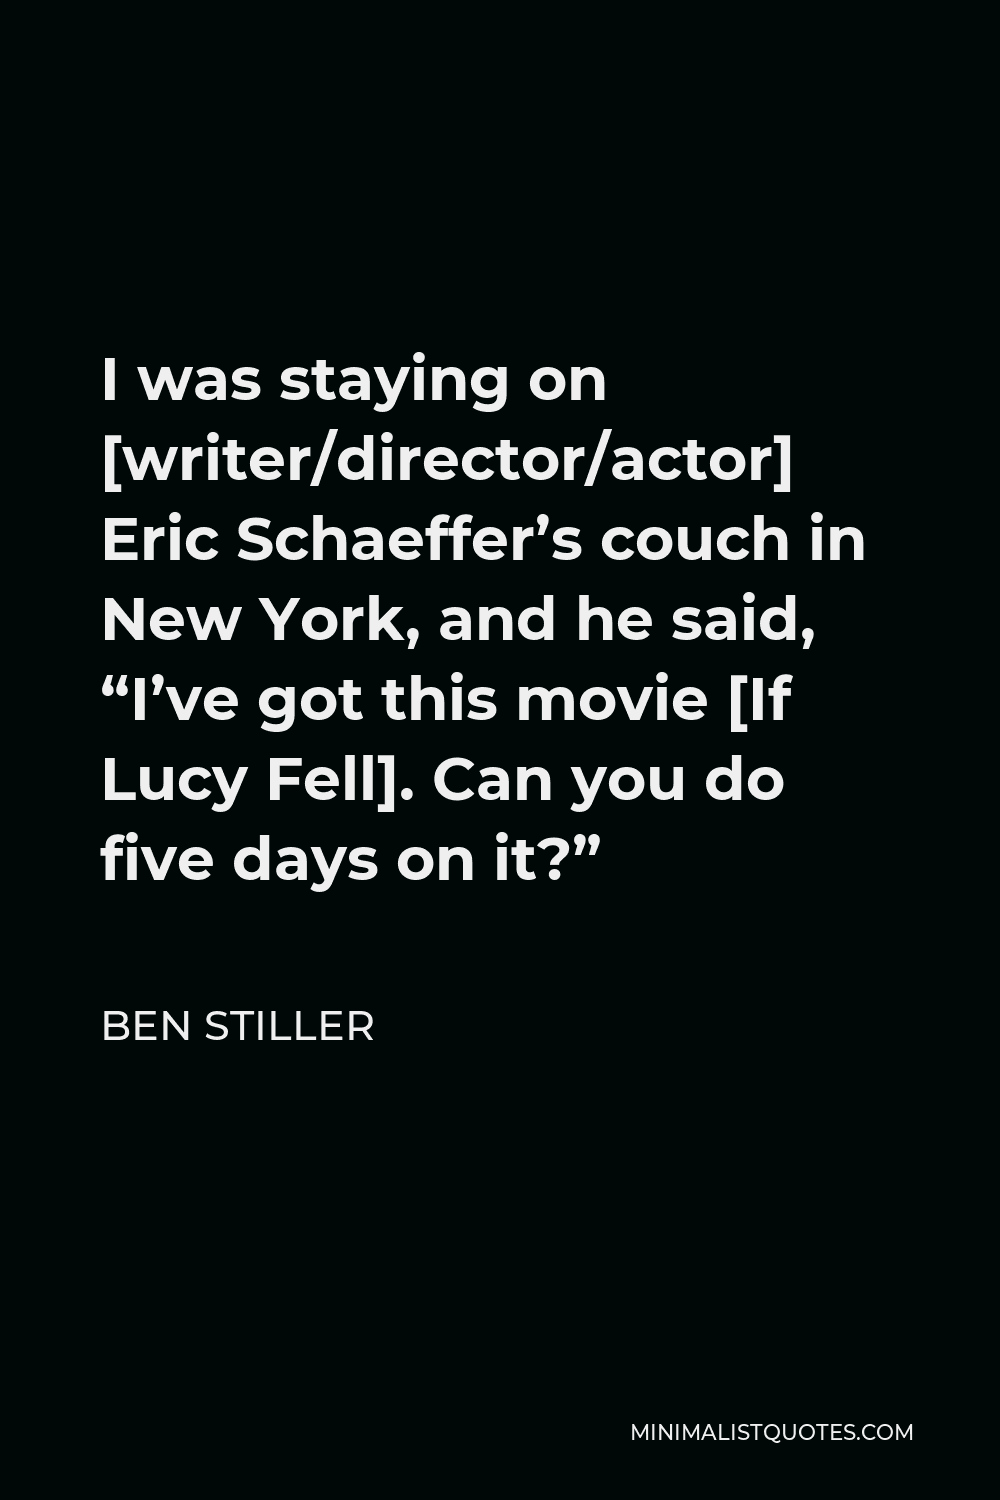 Ben Stiller Quote - I was staying on [writer/director/actor] Eric Schaeffer’s couch in New York, and he said, “I’ve got this movie [If Lucy Fell]. Can you do five days on it?”